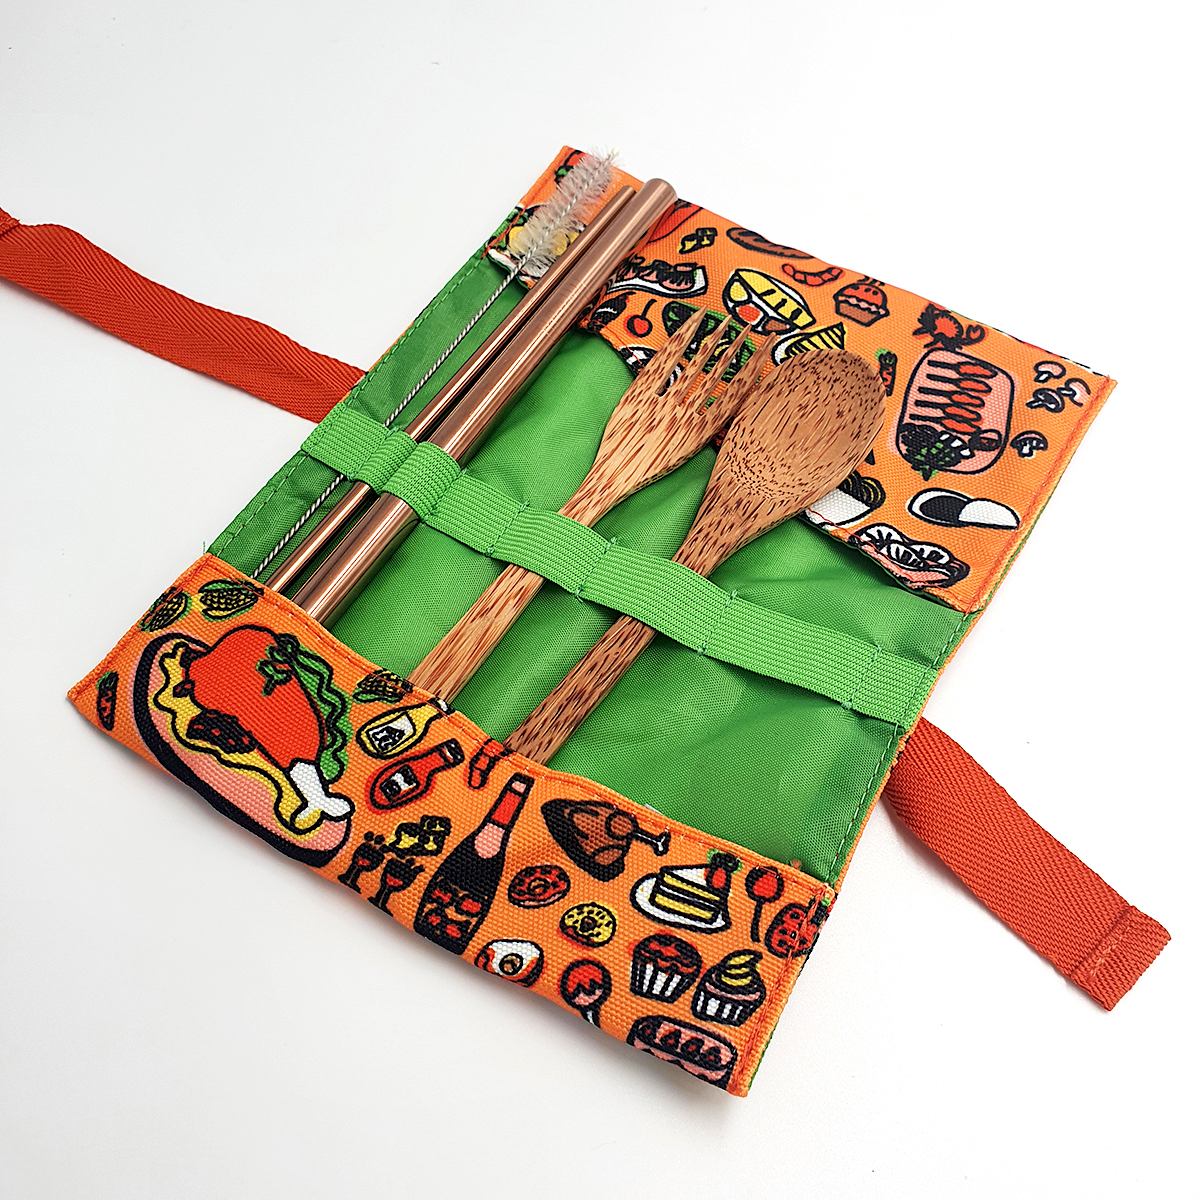 Cutlery Set with Pouch - Big Feast